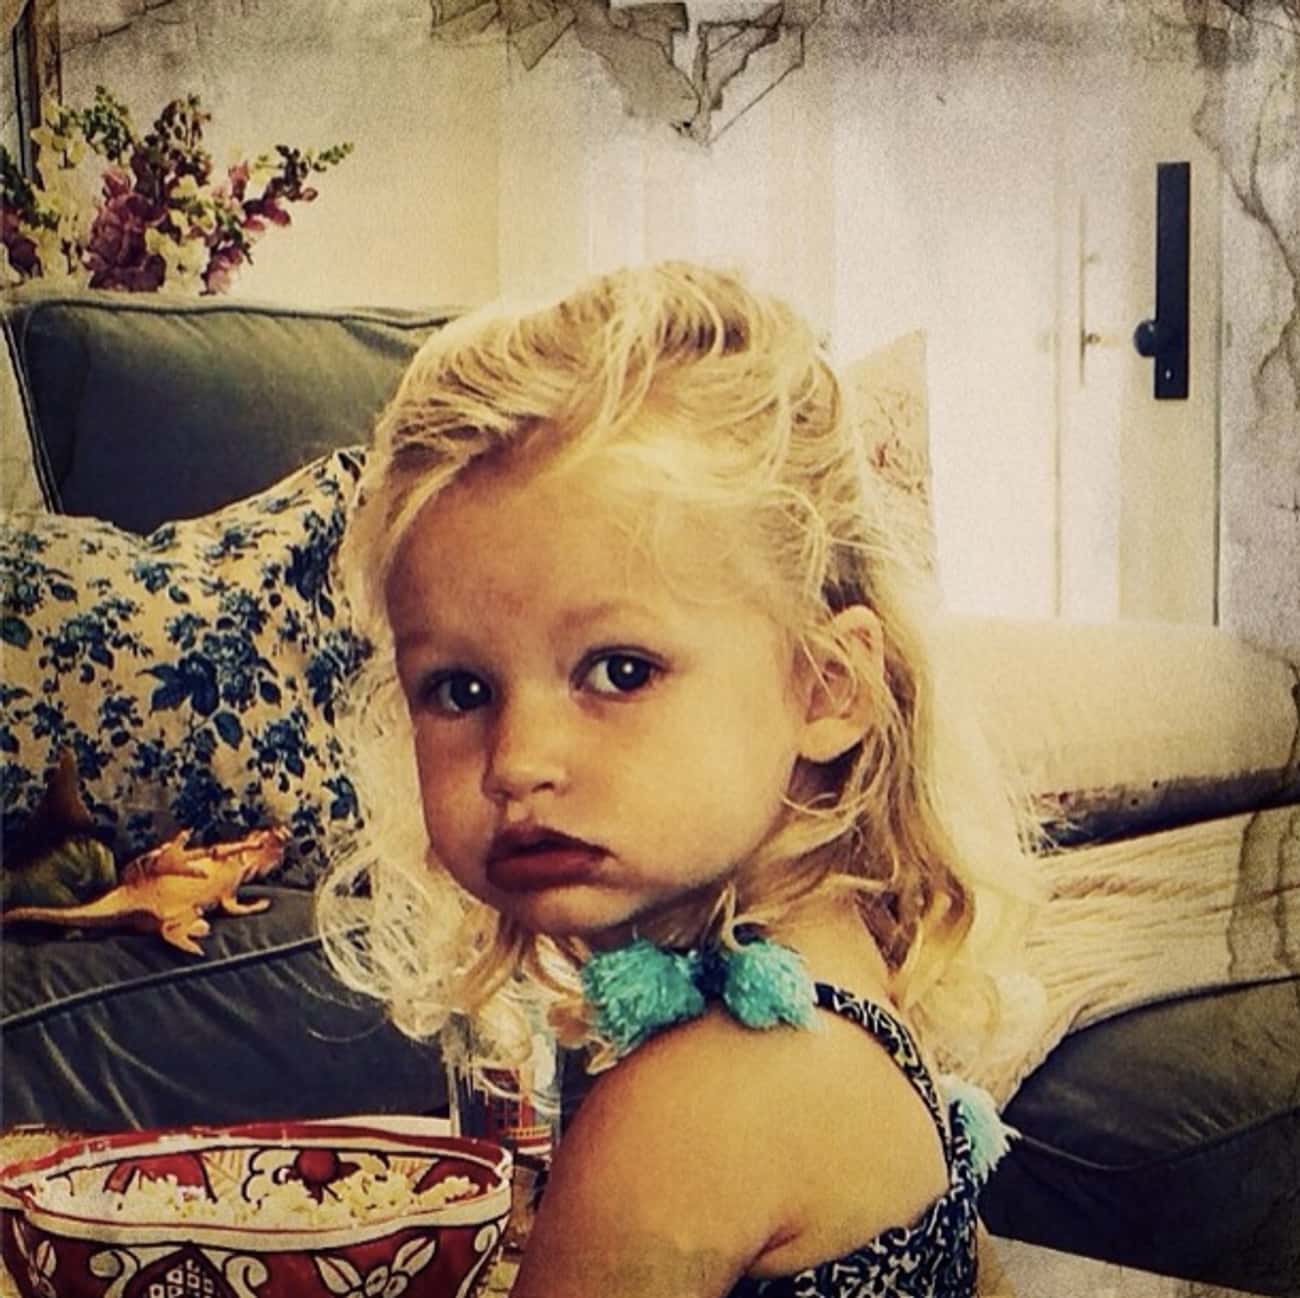 Young Jessica Simpson as a Toddler